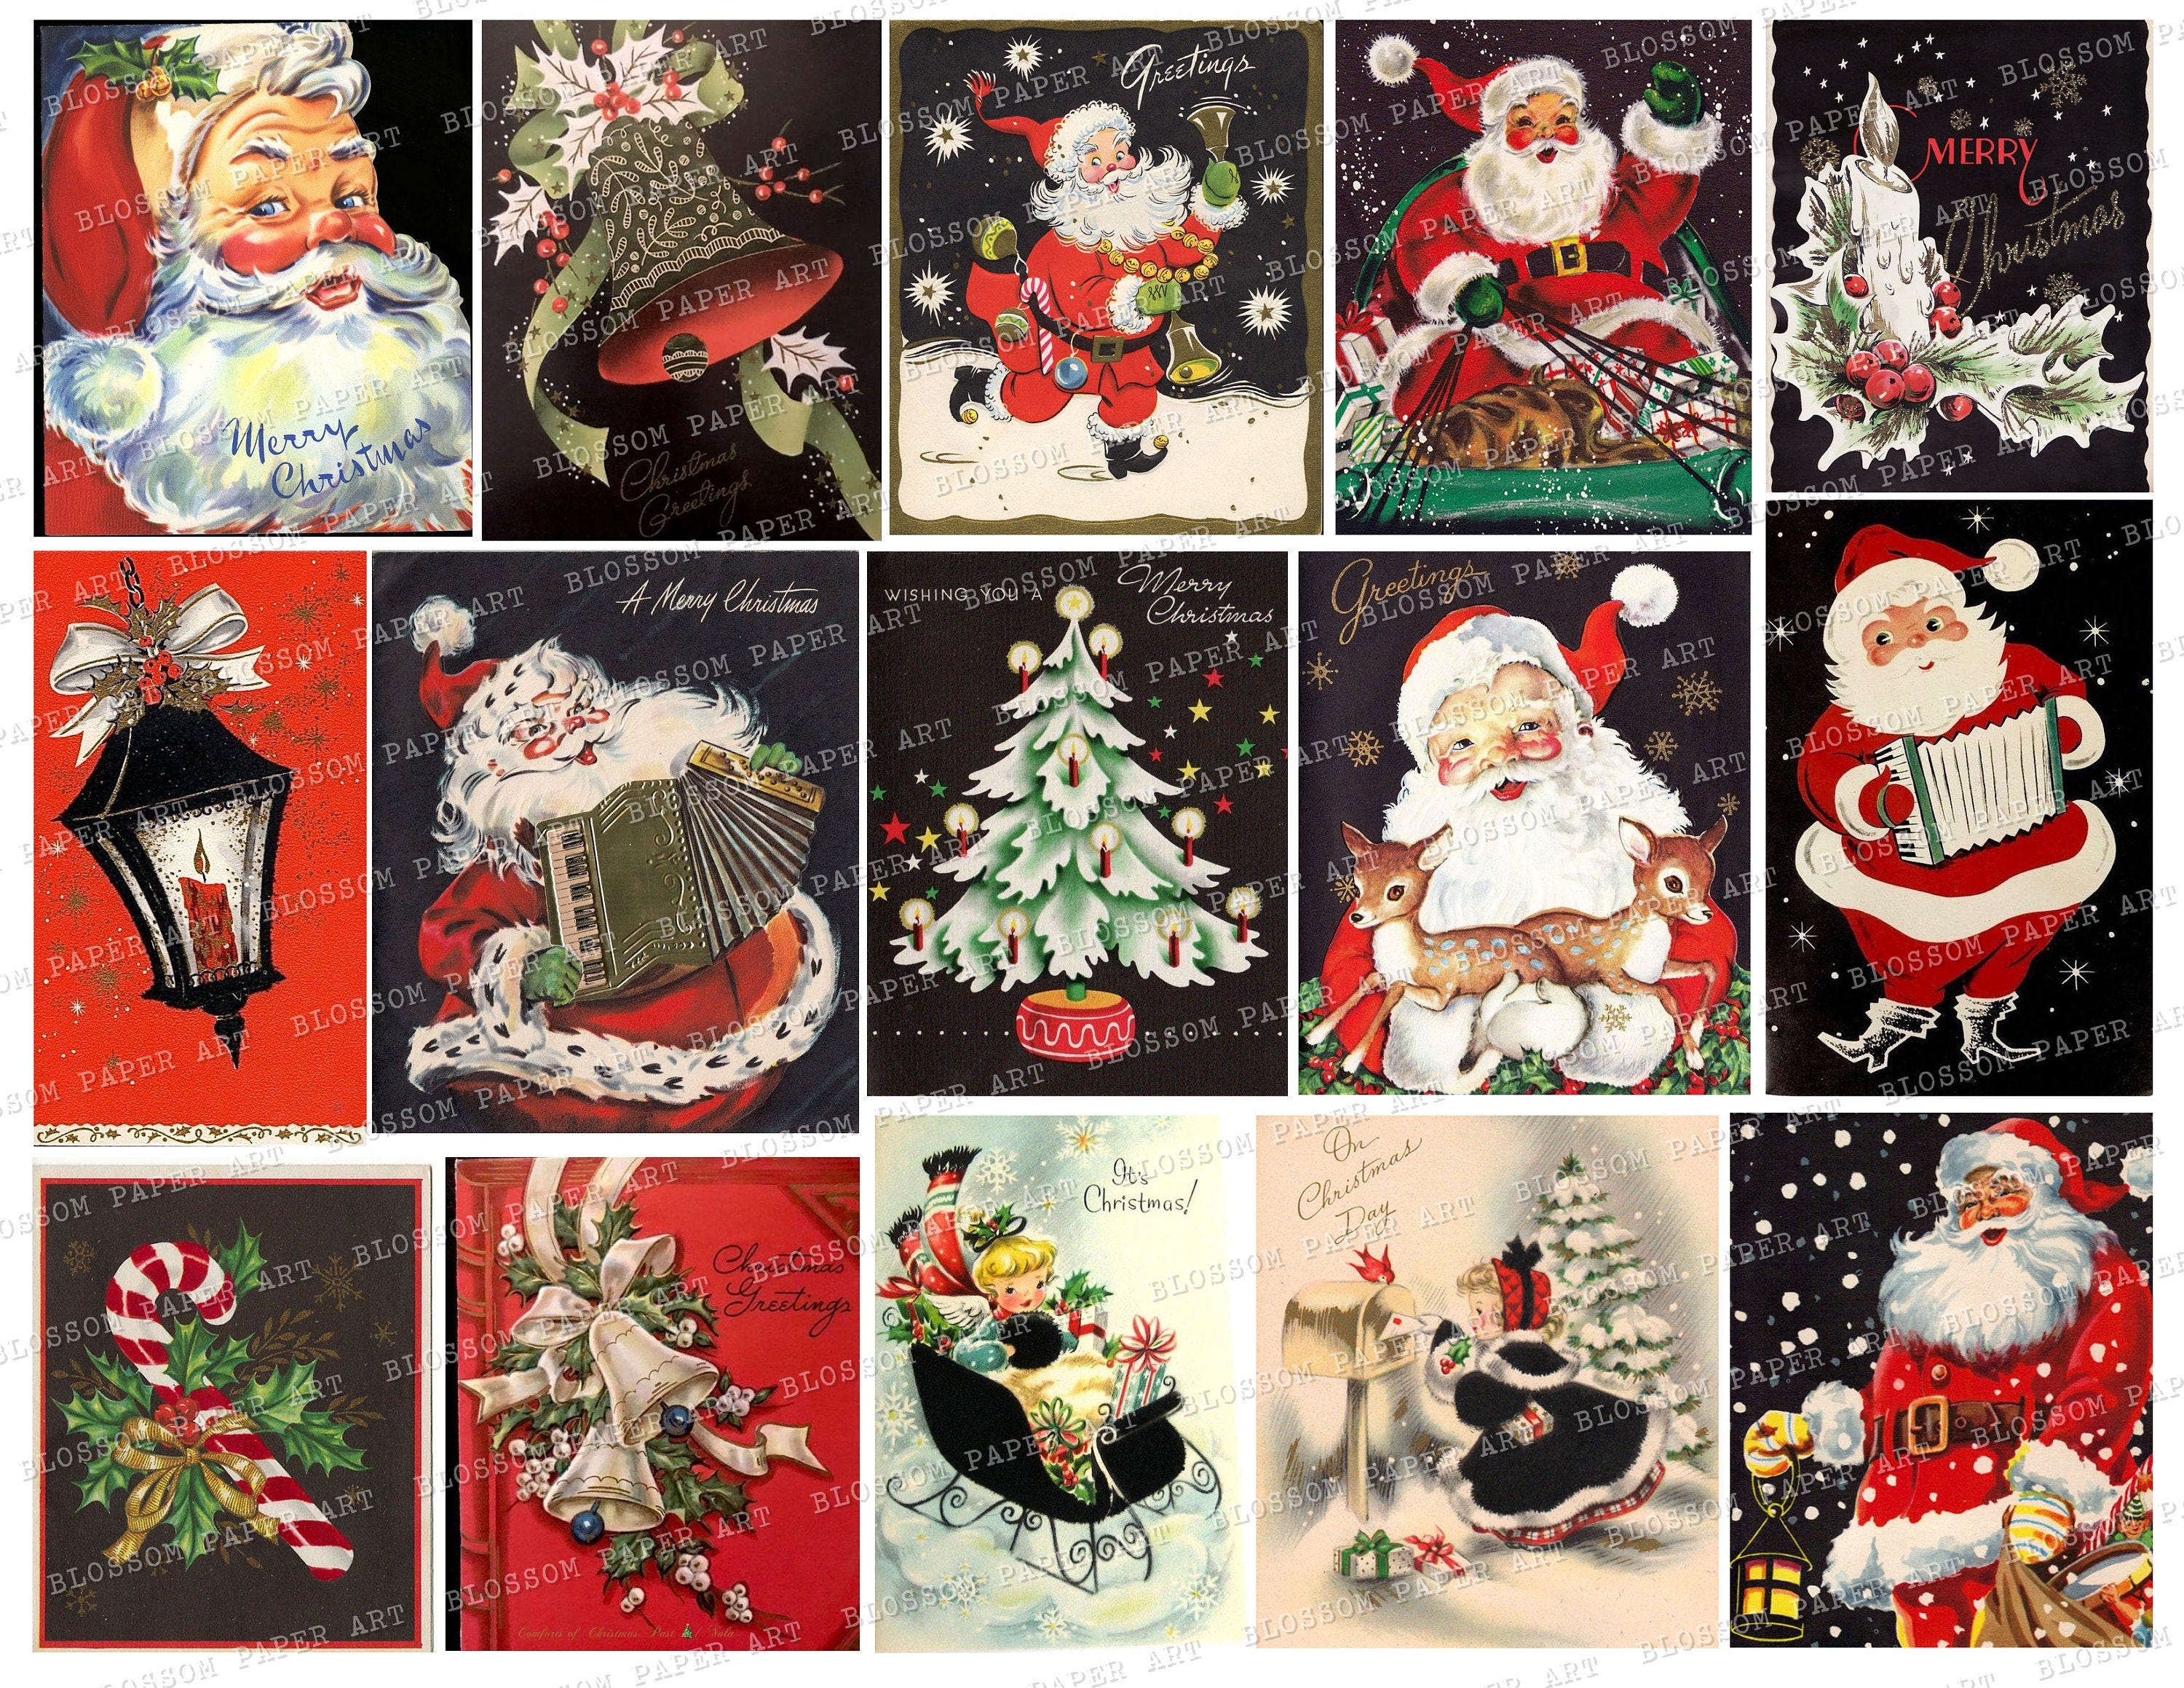 Vintage Greeting Cards, Christmas Cards, Ephemera, Vintage Christmas Cards, Junk Journal Images, Christmas Printable Scraps, Collage 2784